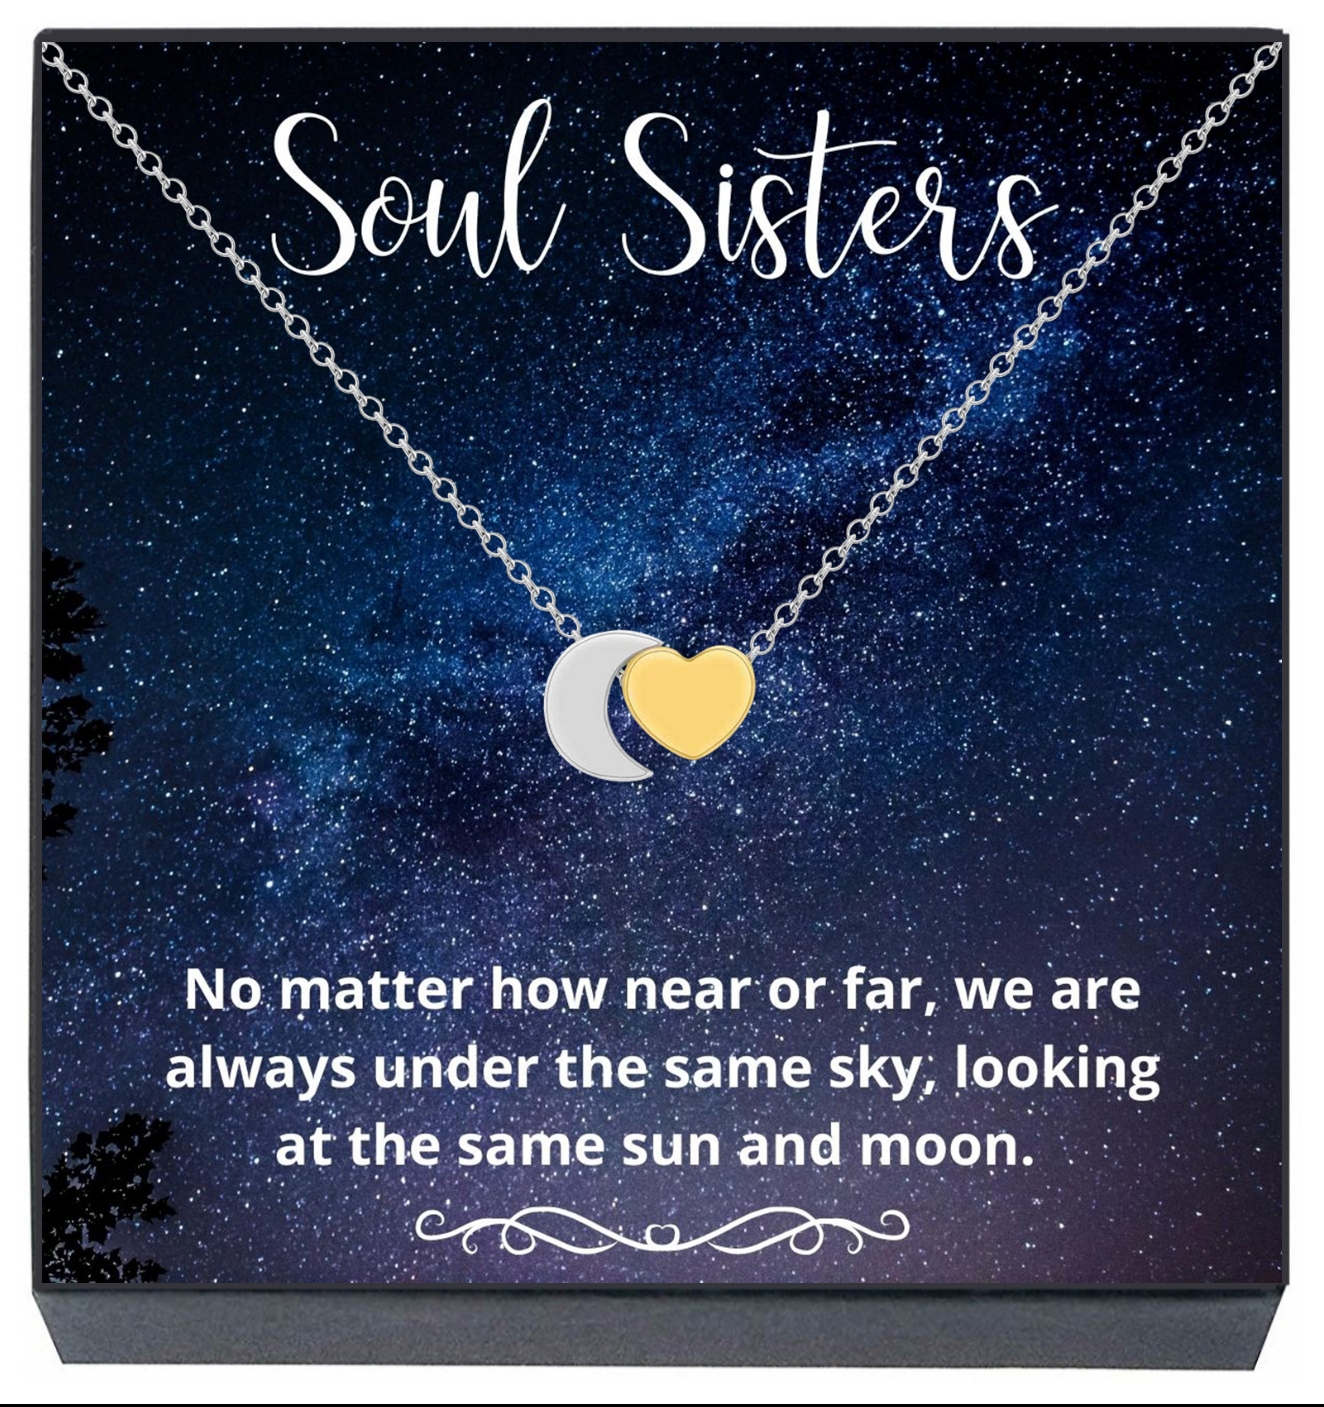 Soul Sisters Necklace, Best Friends Jewelry Gifts, Soul Sisters Moon Heart Necklace, Unique Friendship Jewelry Gifts Best Friends Forever, BFF, Besties, Women, Teens, Girls (2-Tone Gold) - image 1 of 5